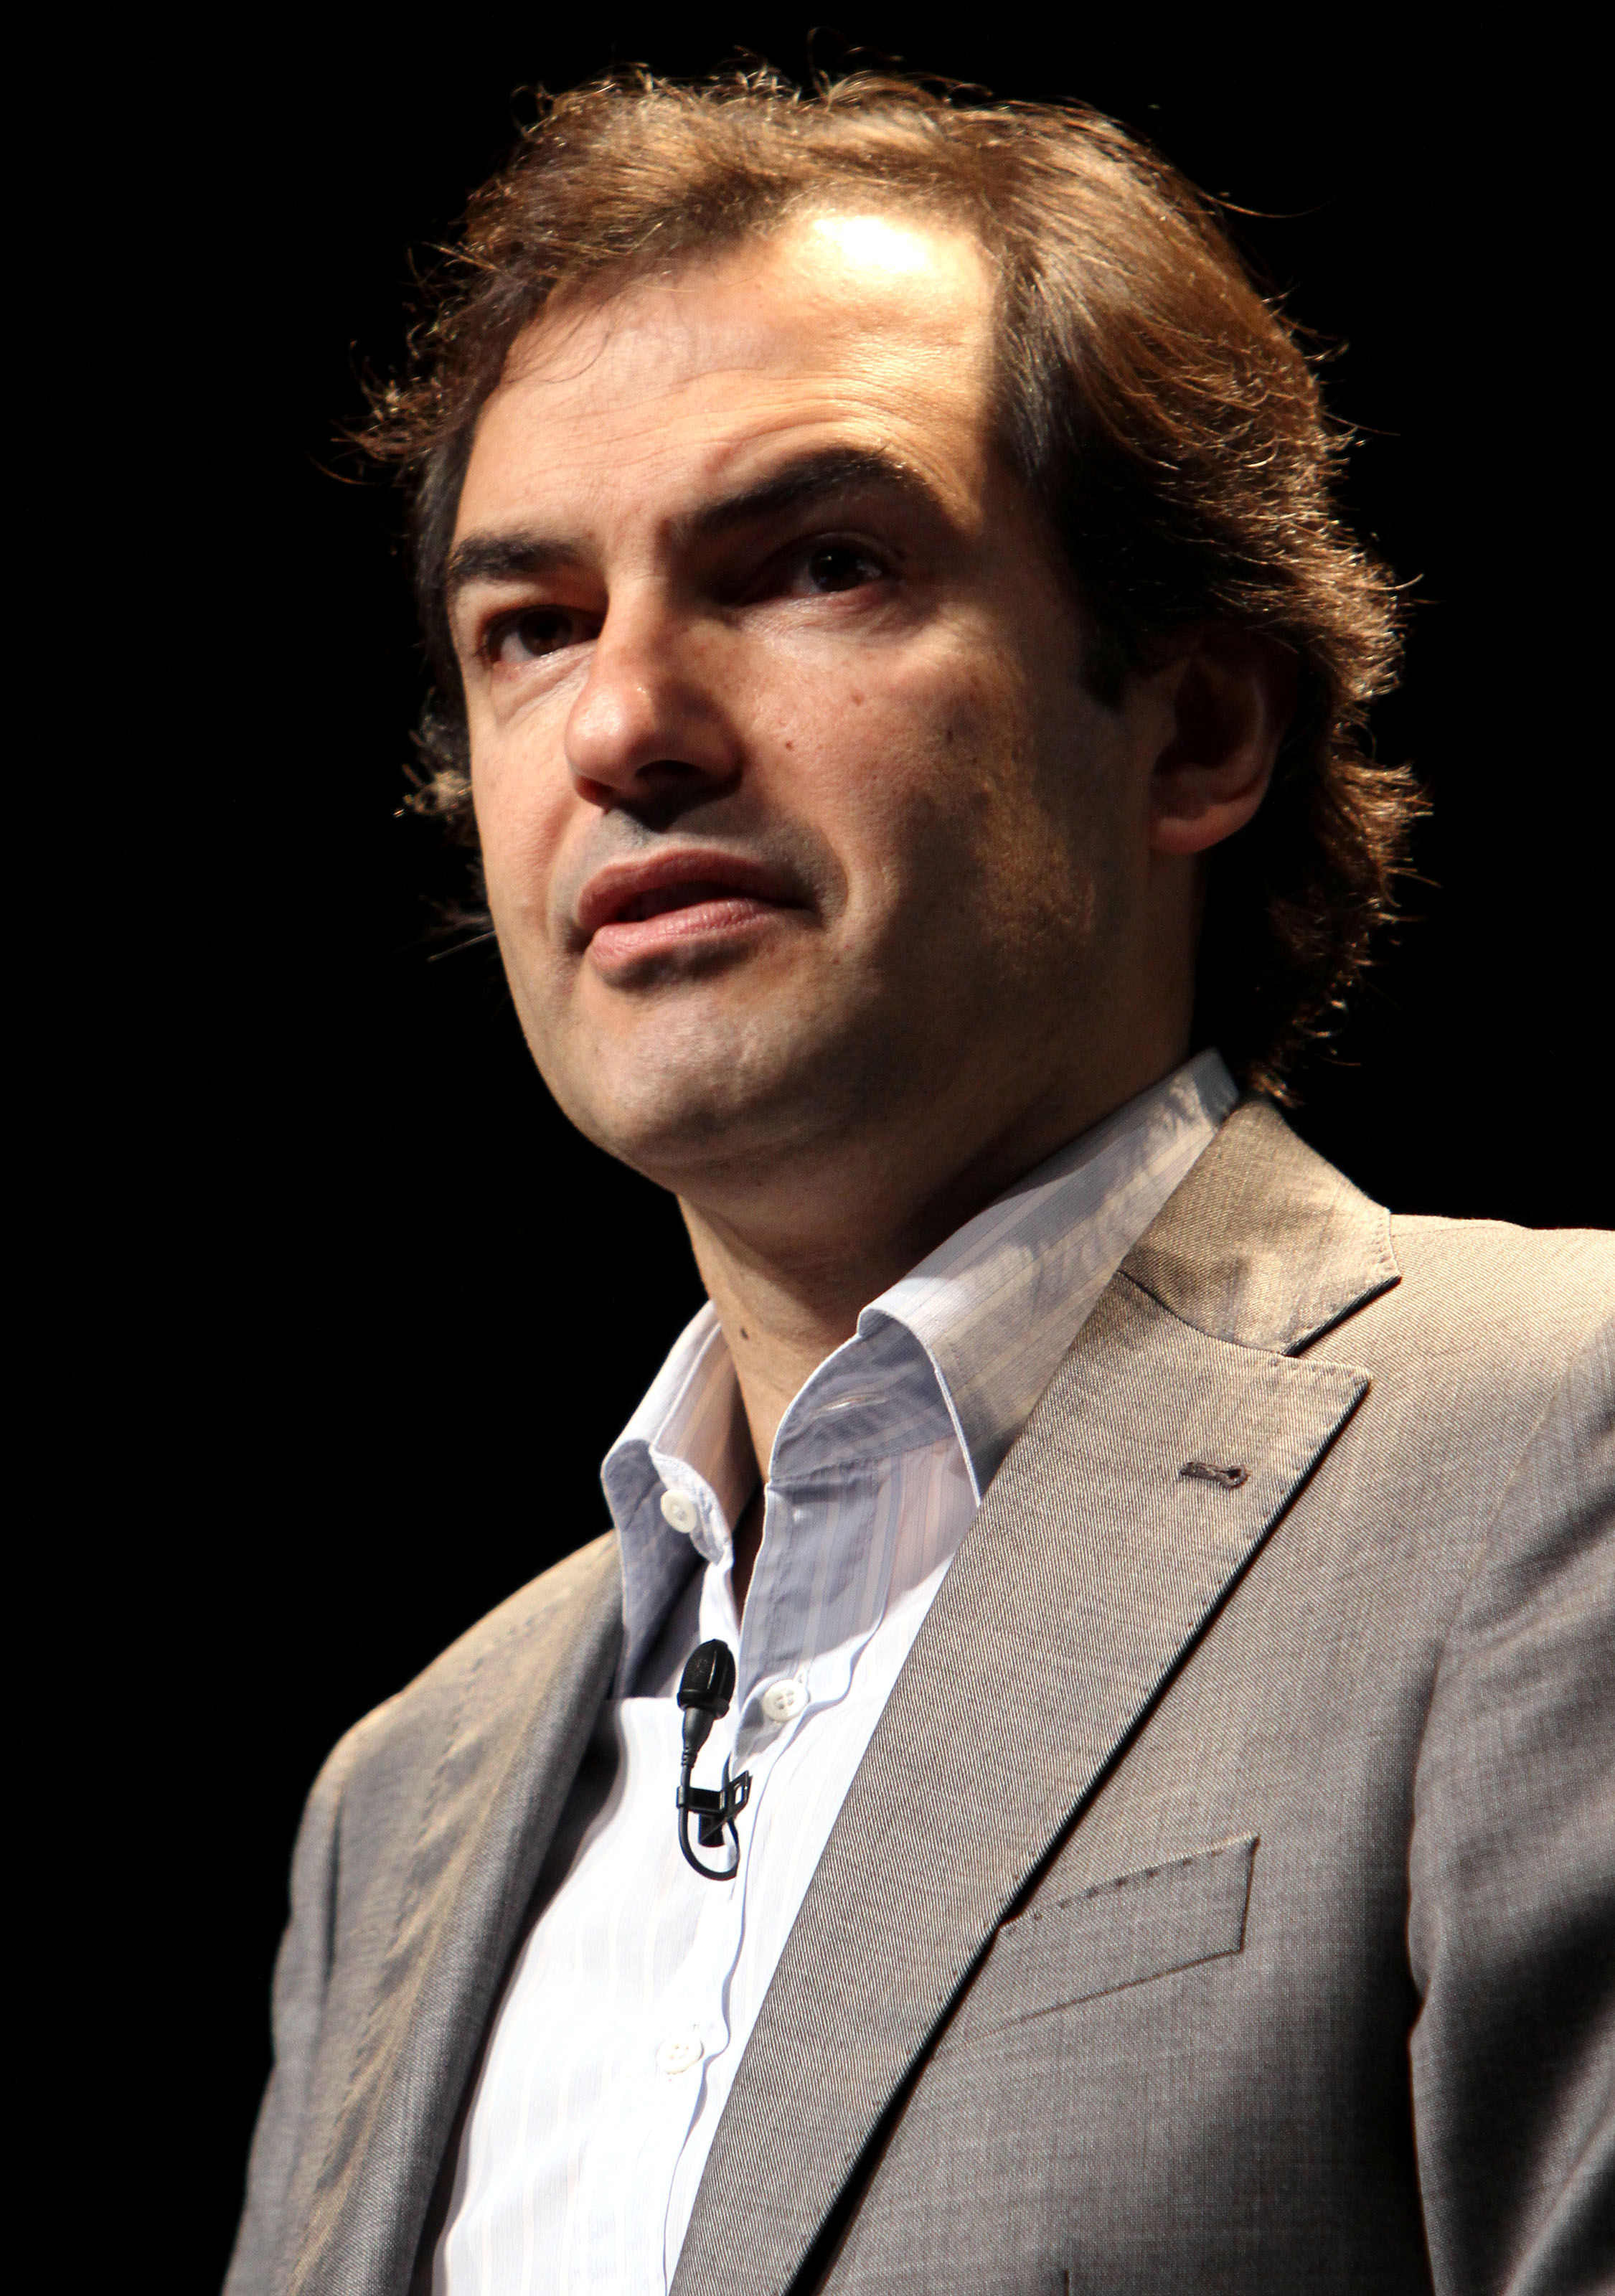 Henrique De Castro, former Vice President Global Media and Platforms of Google, delivers a speech during a session at the Cannes Lions 2010 International Advertising Festival in Cannes, on June 23, 2010.